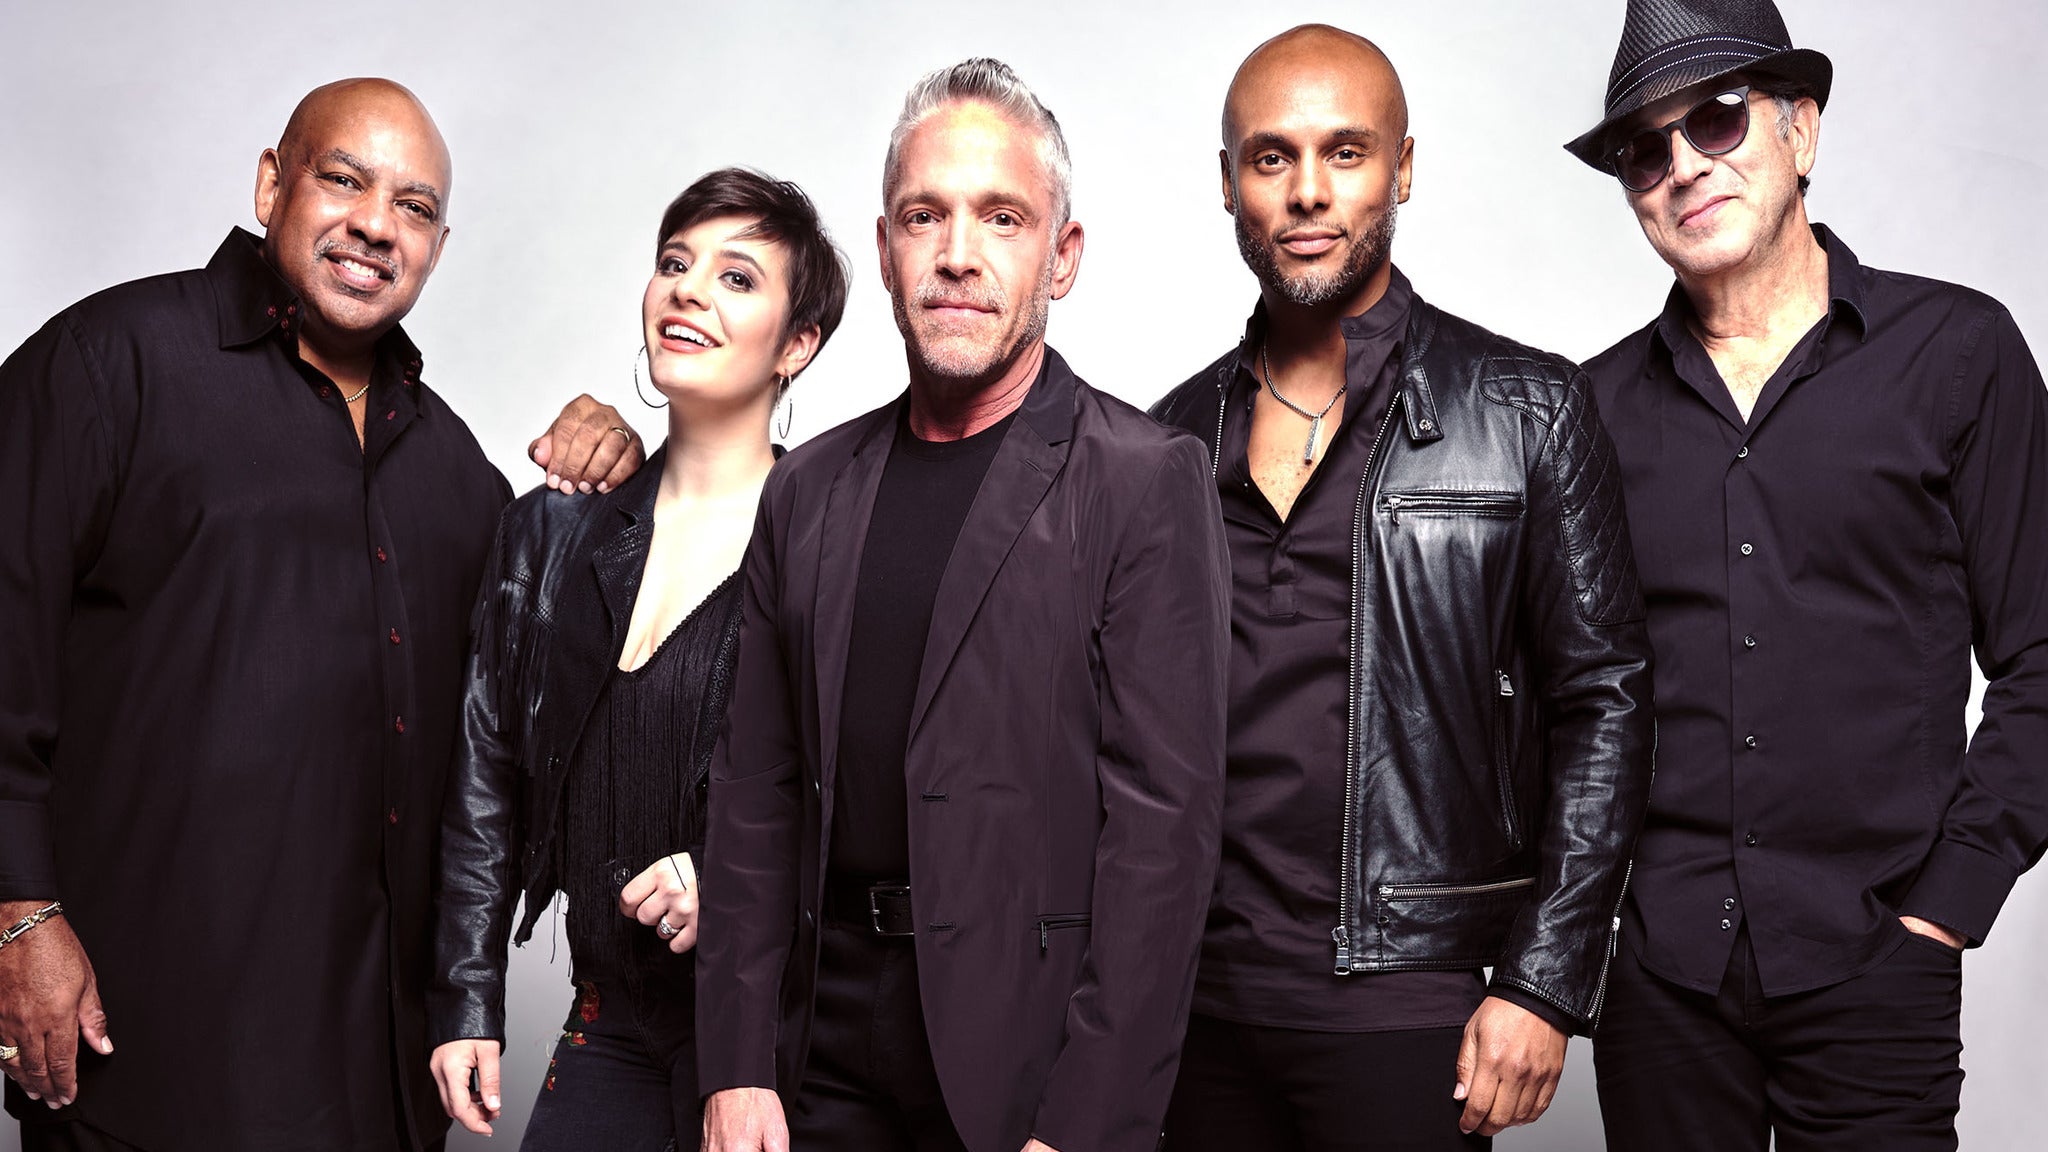 Dave Koz Summer Horns tour dates, presales, tickets and more Box